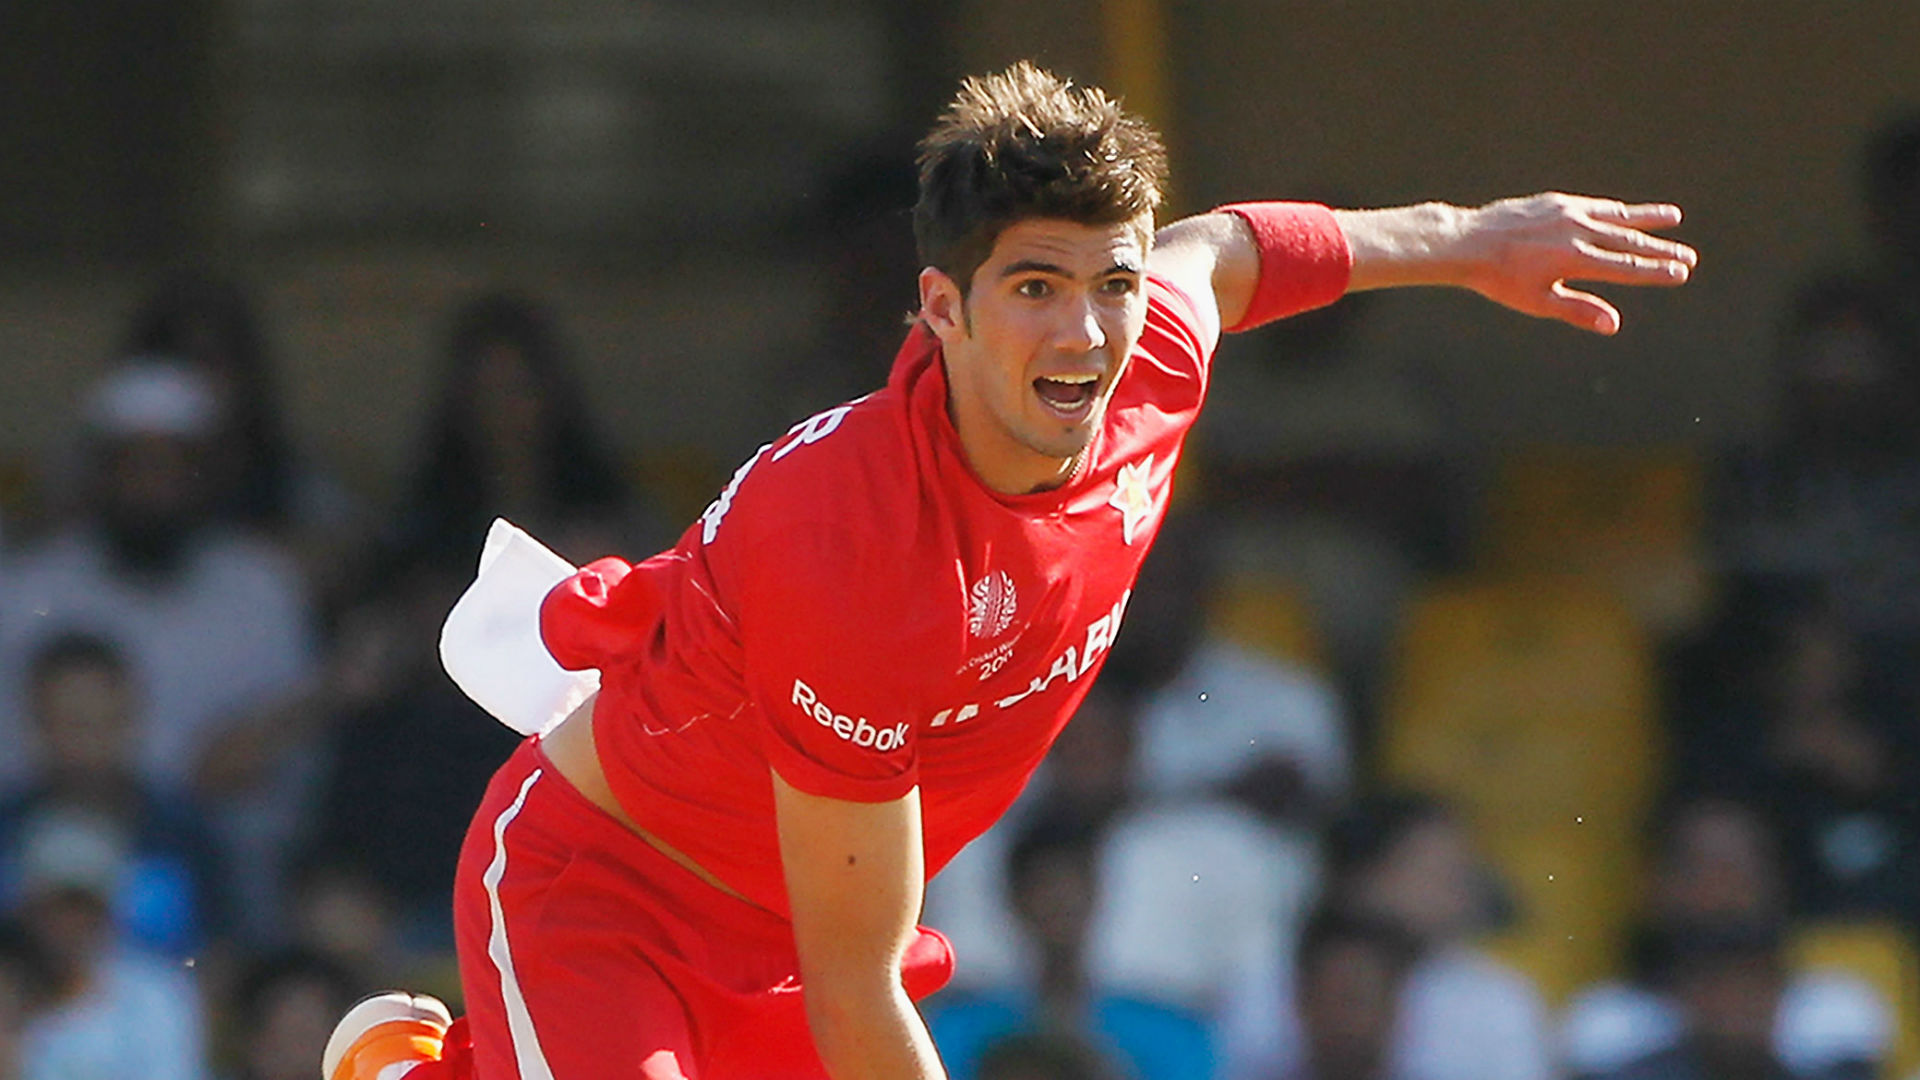 Graeme Cremer has moved to Dubai, putting his cricket career in Zimbabwe on hold, due to family commitments.